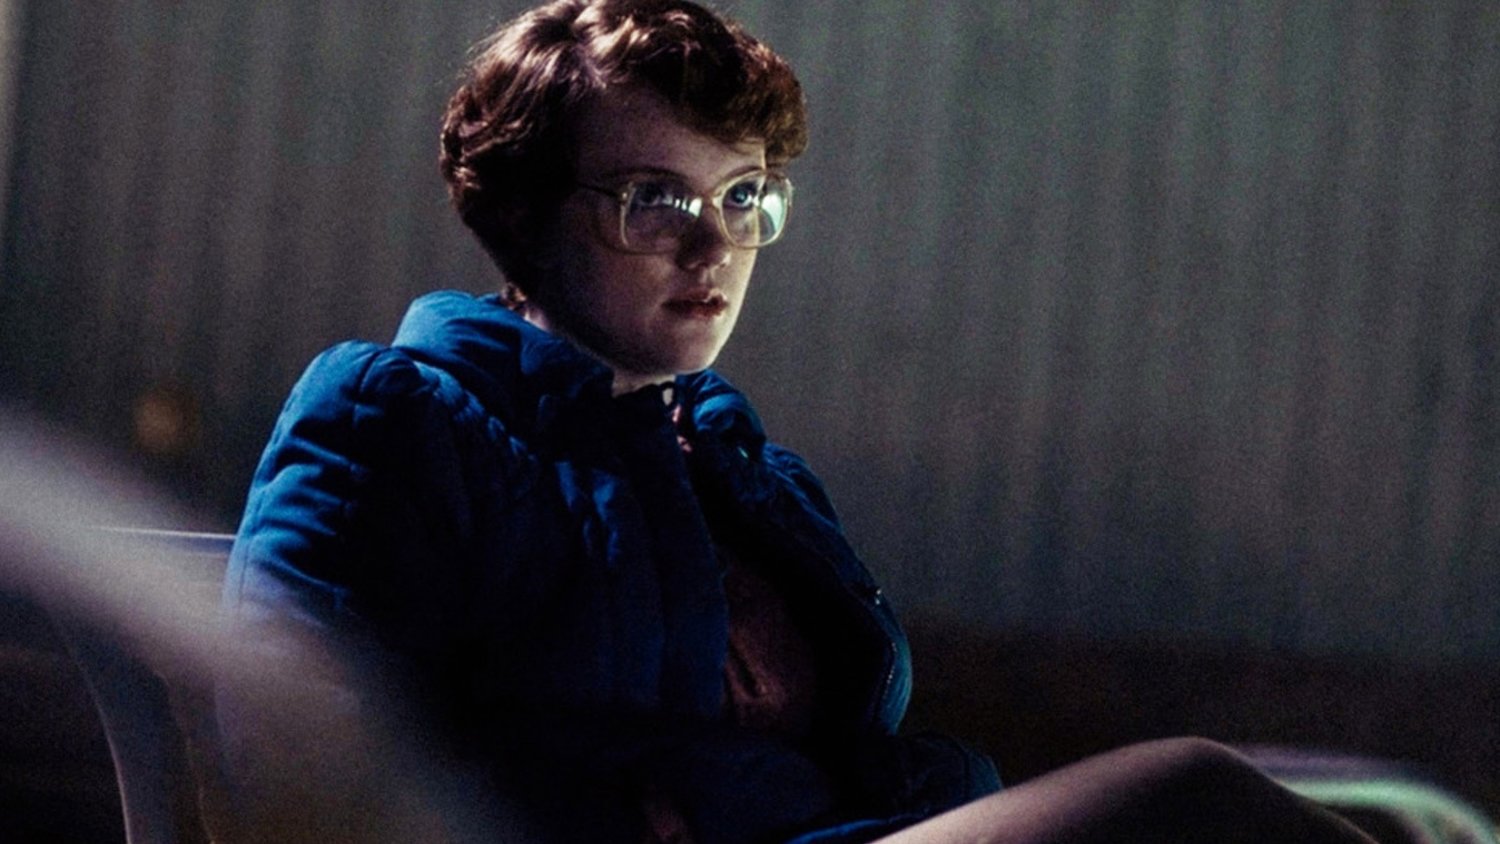 The Full Significance of Barb's Death on STRANGER THINGS - Nerdist